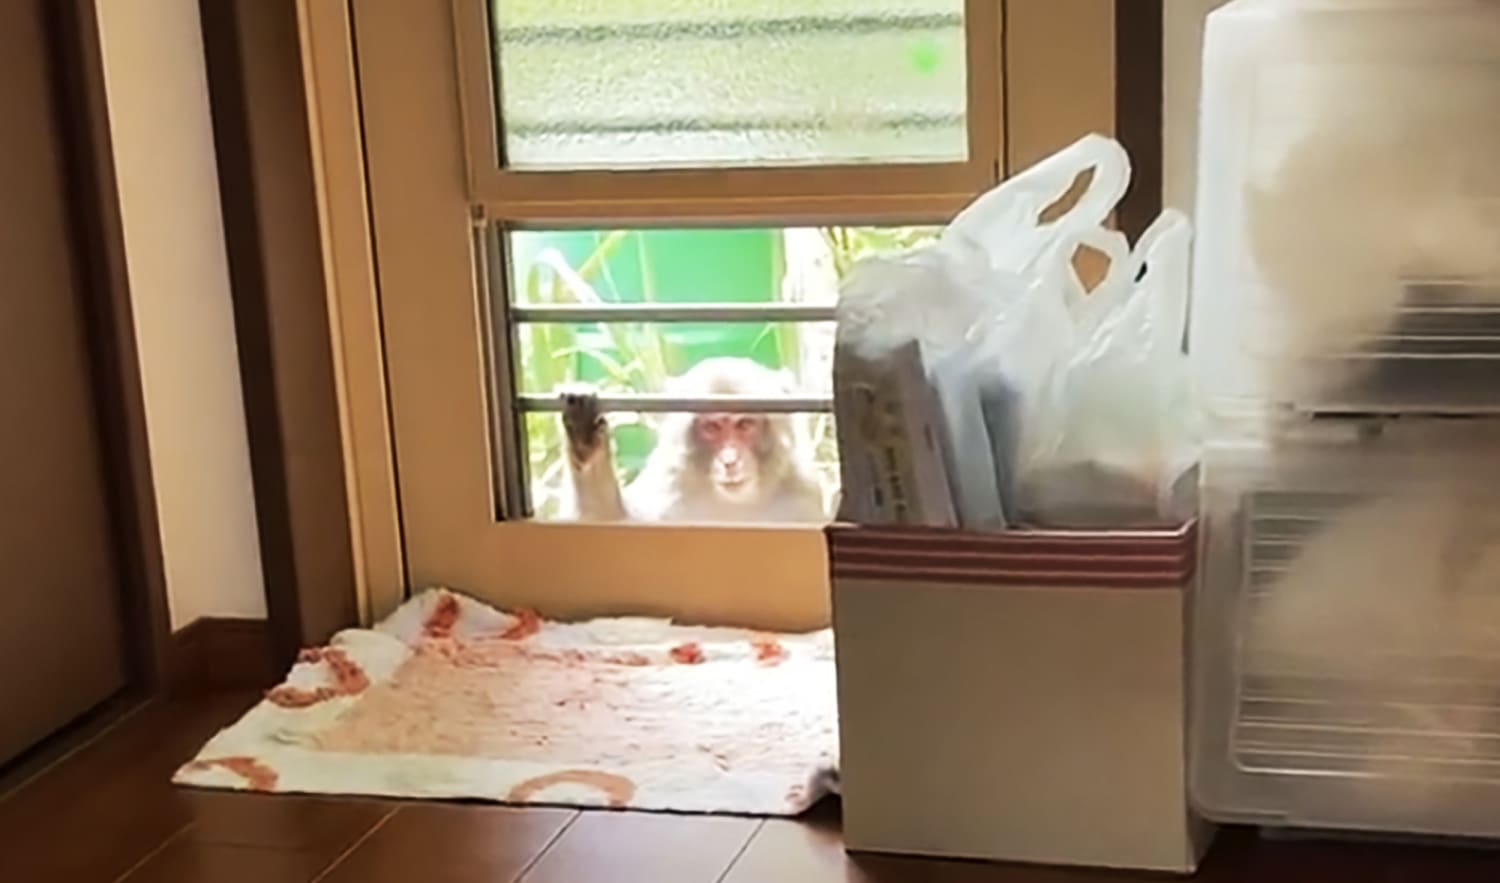 Menacing Monkey Moves into Abandoned House, Attacks Children and